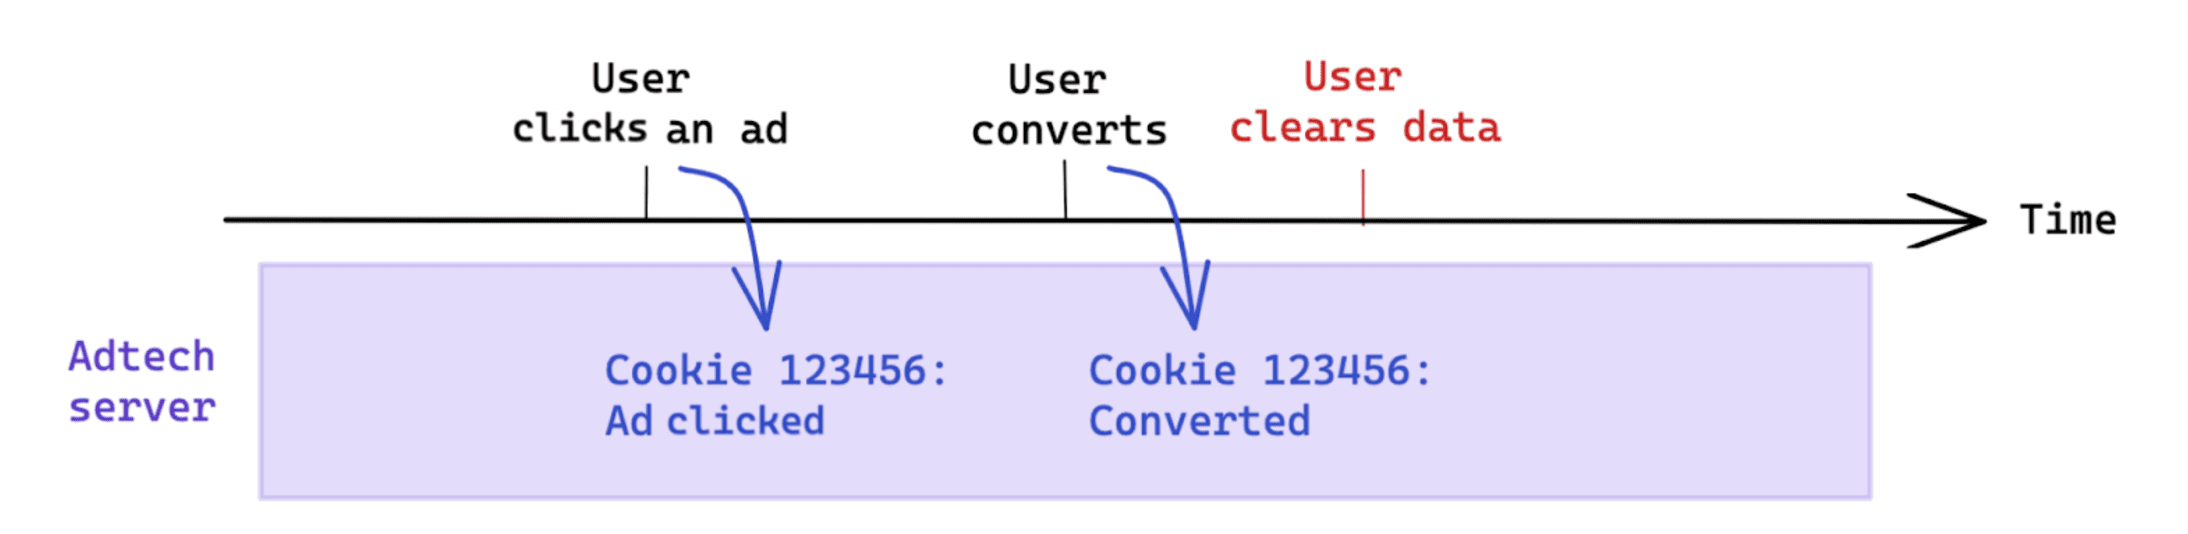 User-initiated data clearing after a conversion doesn't impact cookie-based measurement.